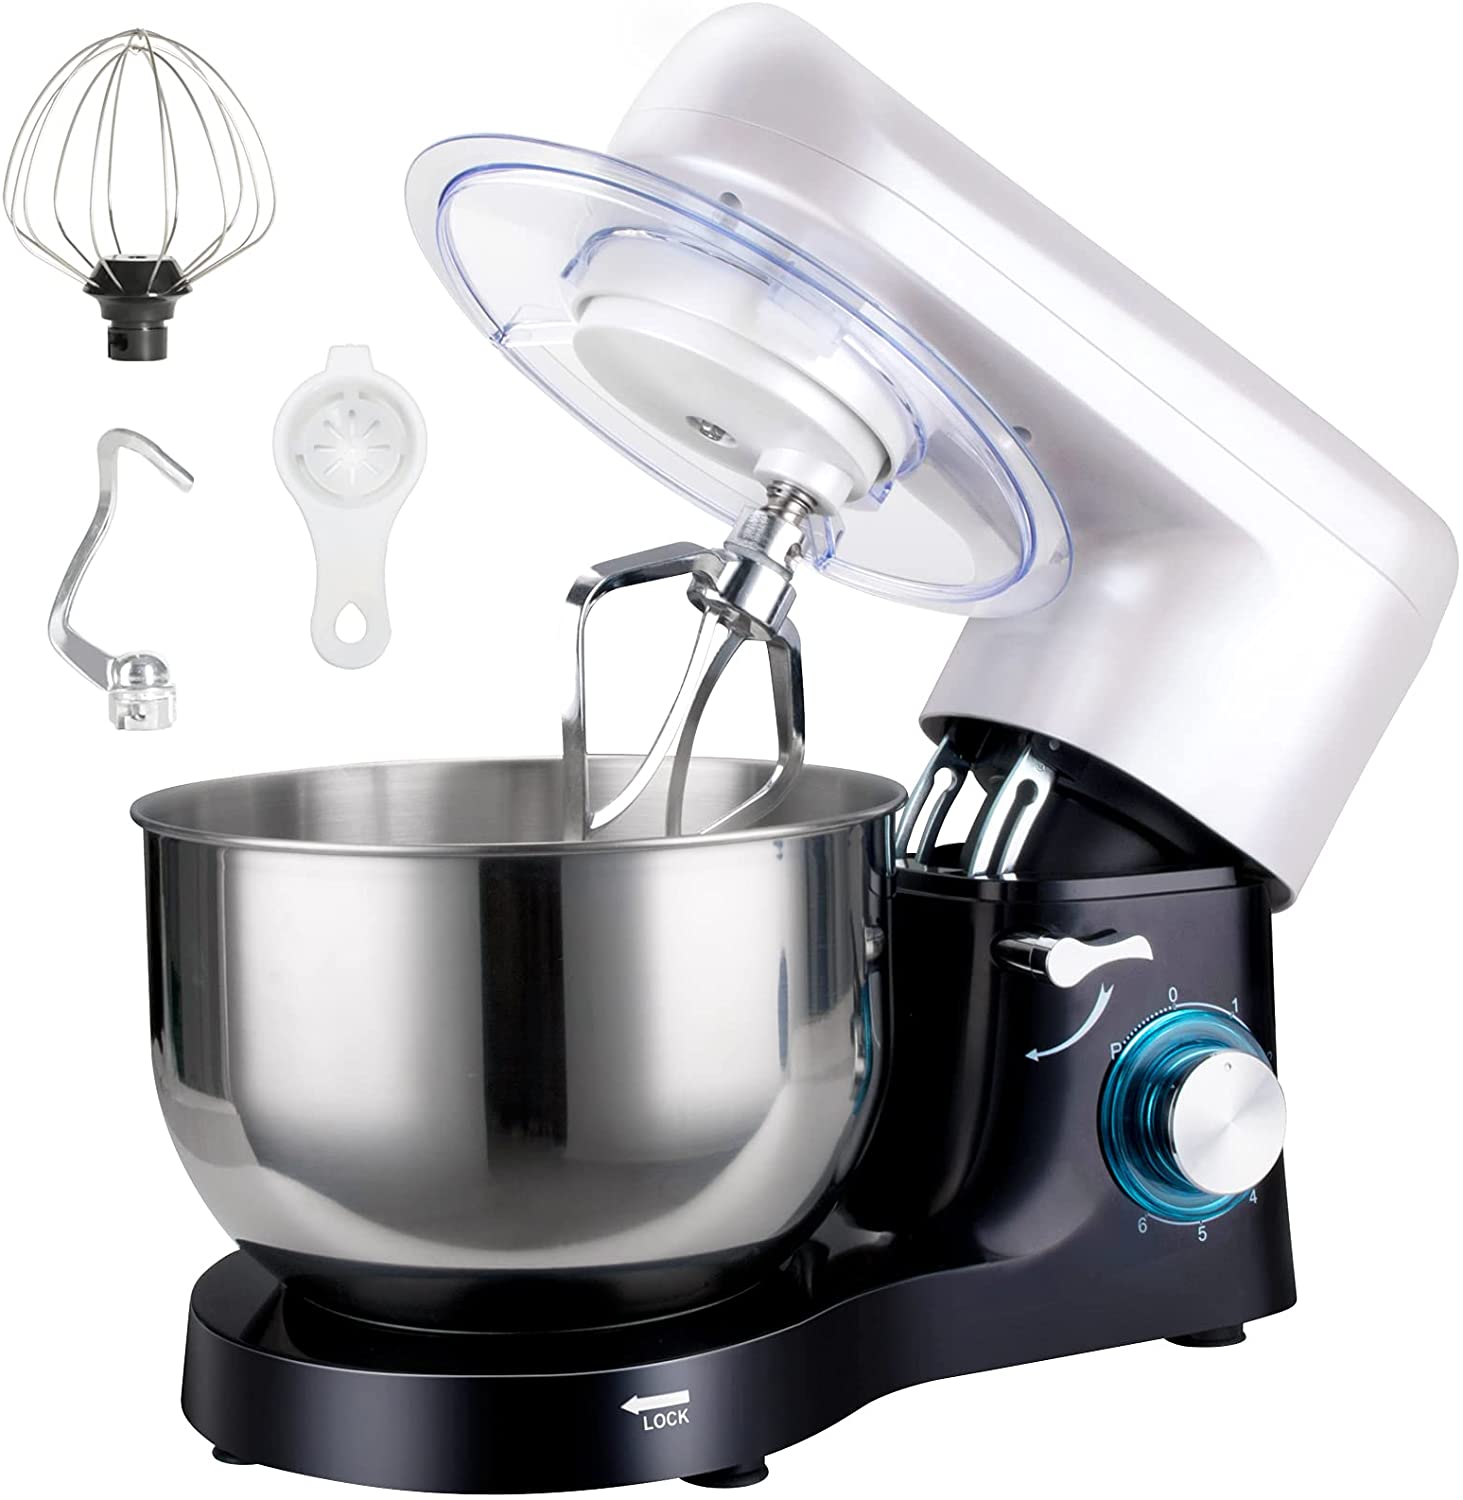 CFORM Food Processor, Food Processor Mixer, 1500 W, 6-Speed Dough Mixer with Tilting Head, 5.5 L Stainless Steel Bowl, Including Rack, Dough Hook, Whisk and Splash Guard